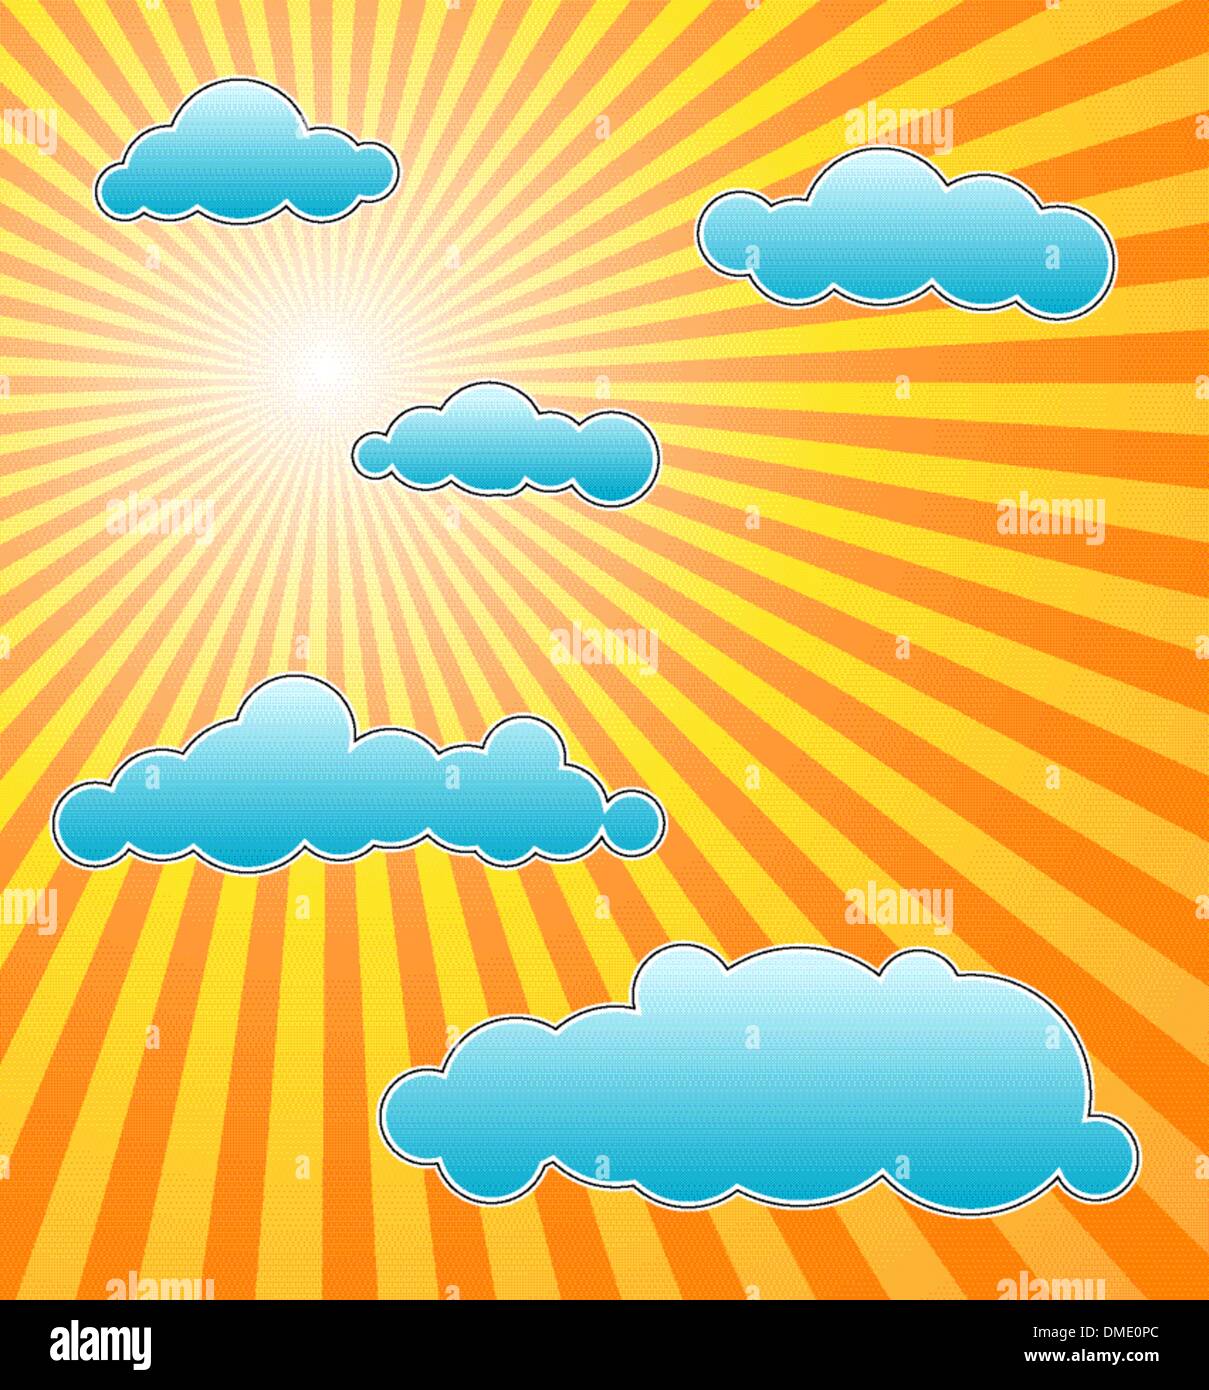 Hot summer Stock Vector Images - Alamy